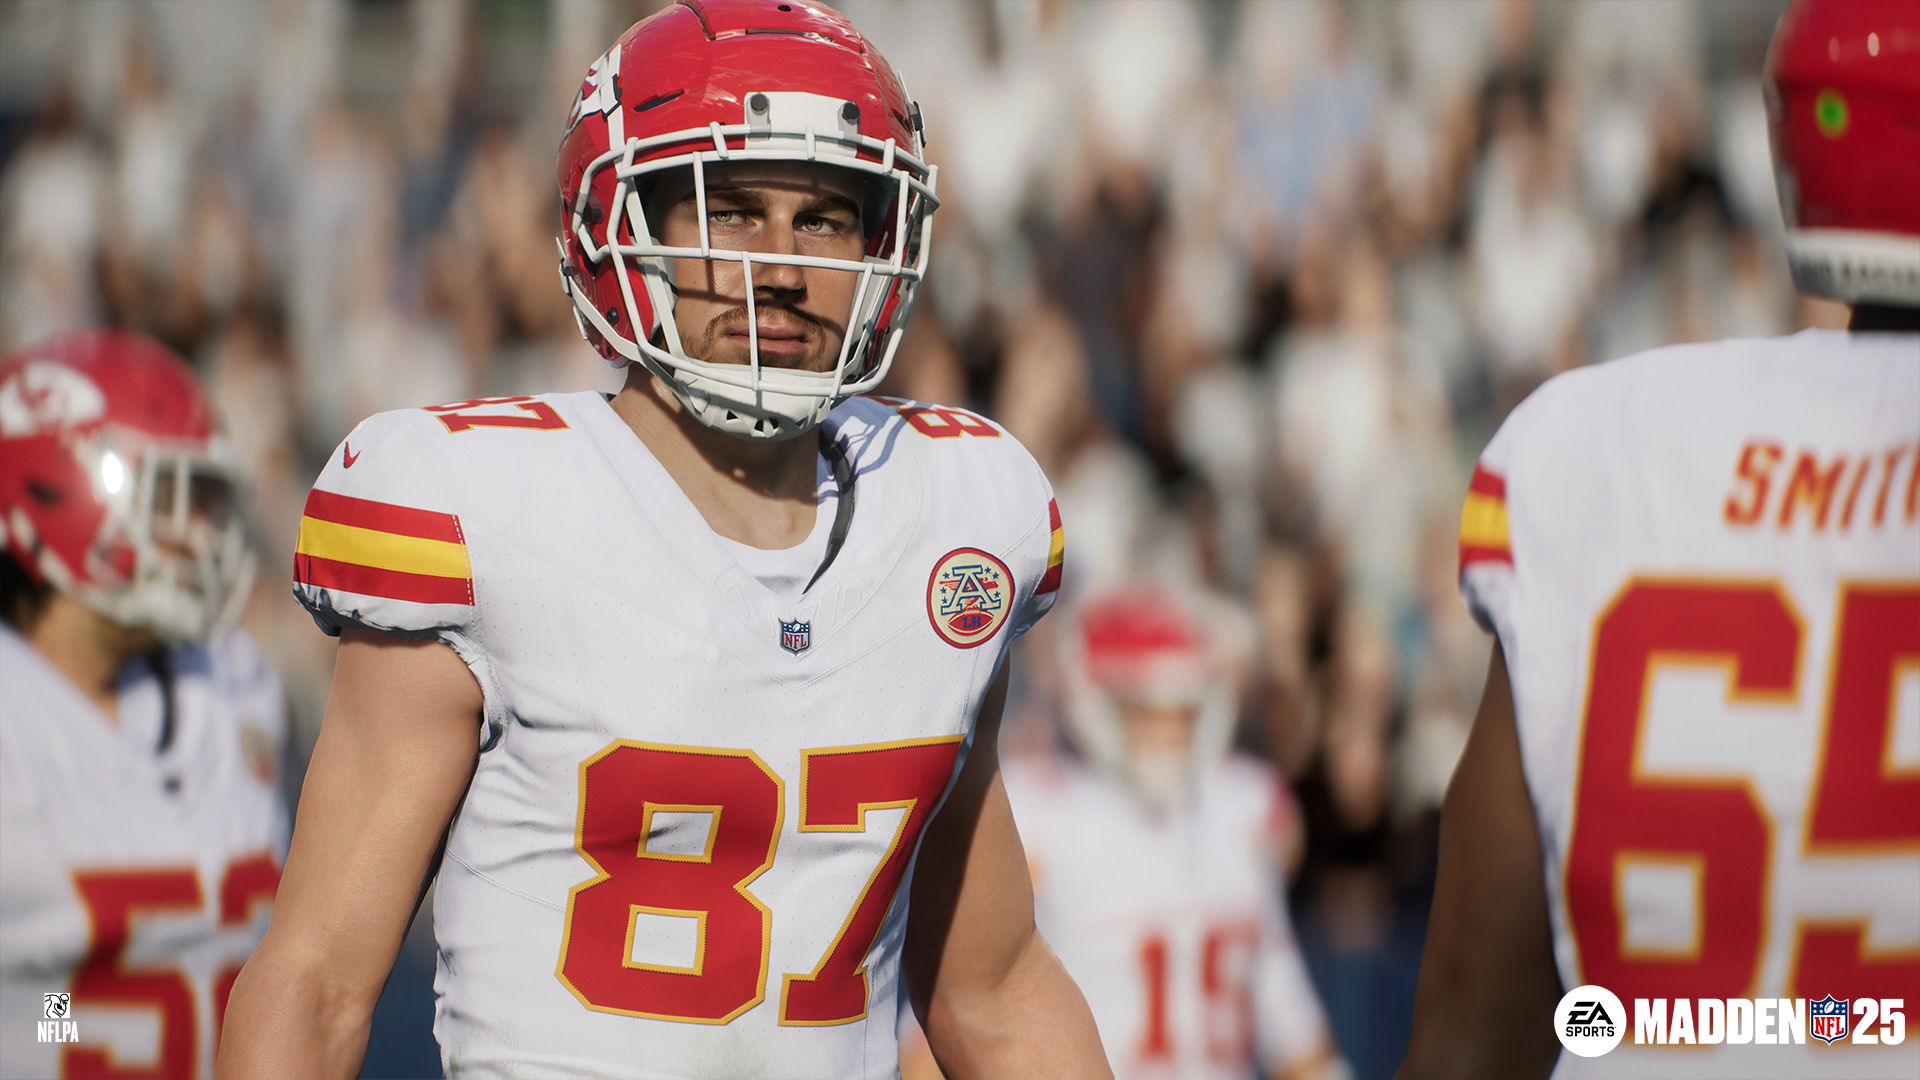 Kansas City's Travis Kelce, aka Mr. Taylor Swift, as the NFL tight end appears in Madden NFL 25